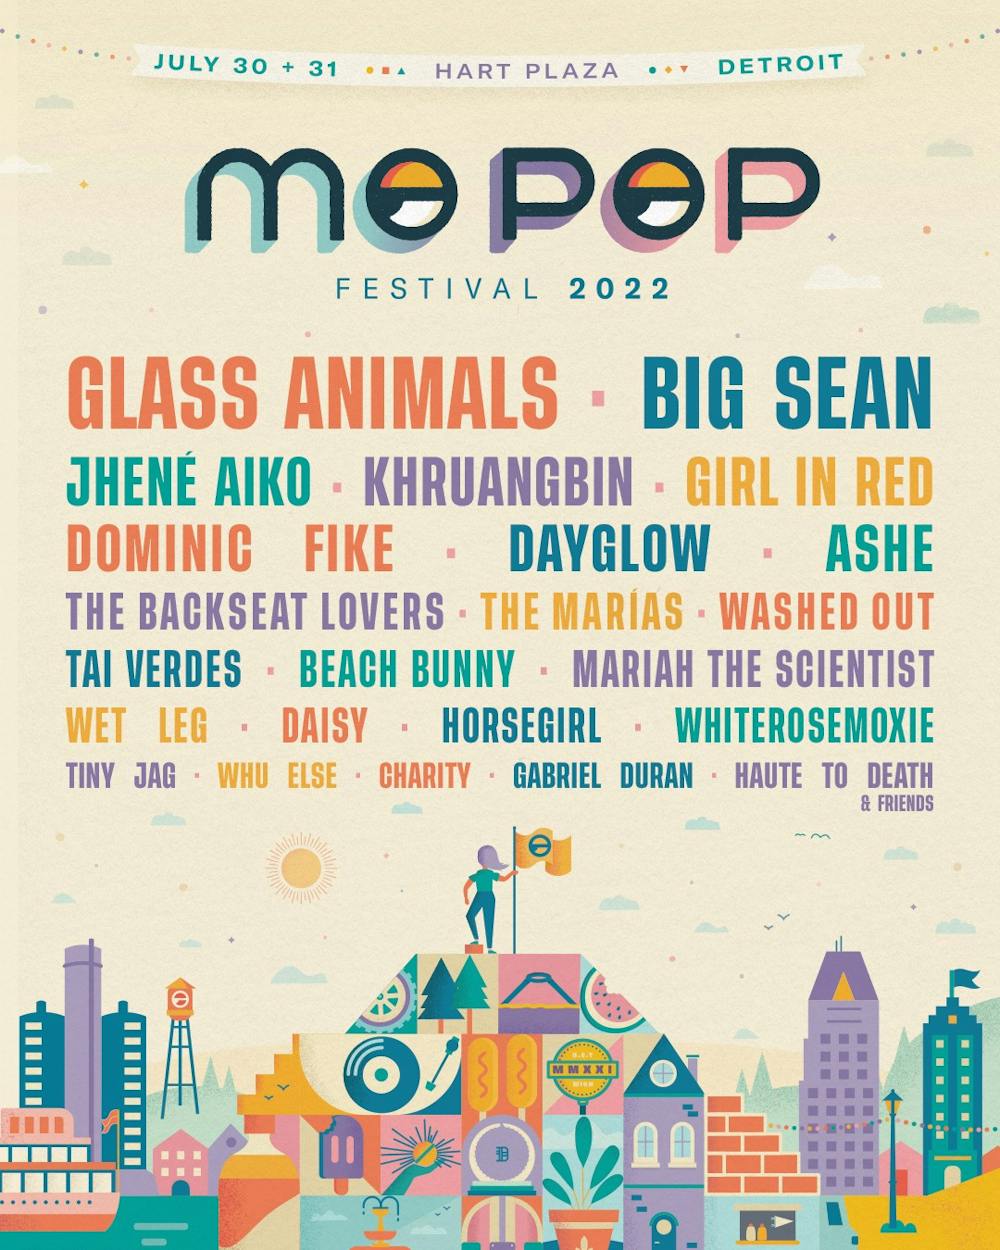 Initial line up for Mo Pop Festival 2019 in Detroit